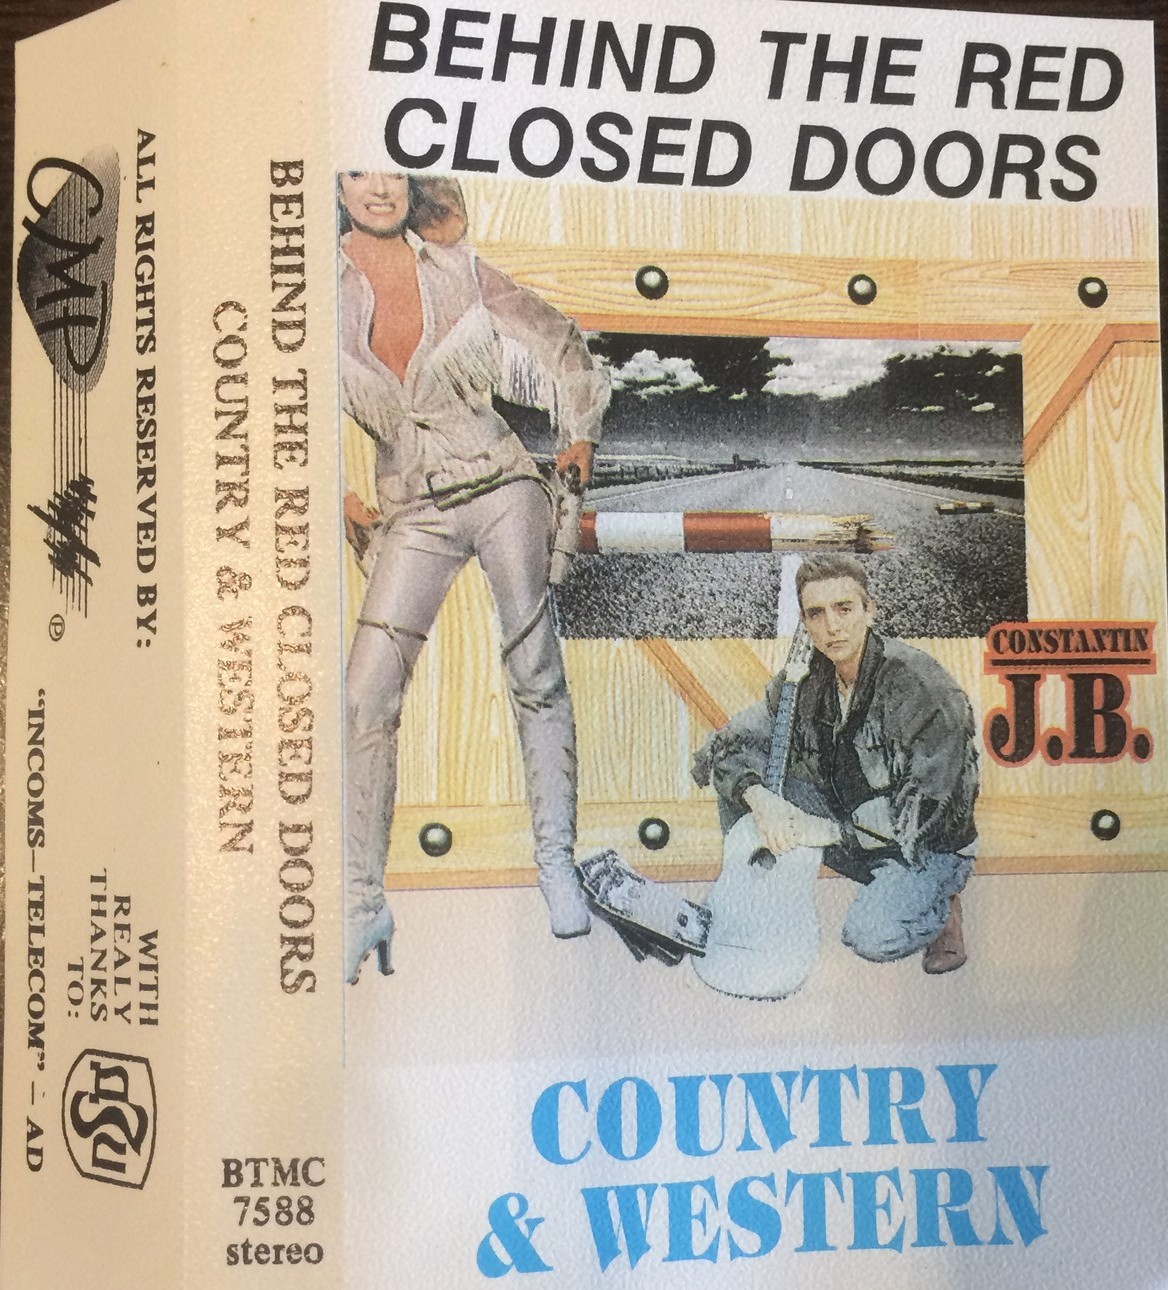 Behind the red closed doors. Country & Western. CONSTANTIN J.B.